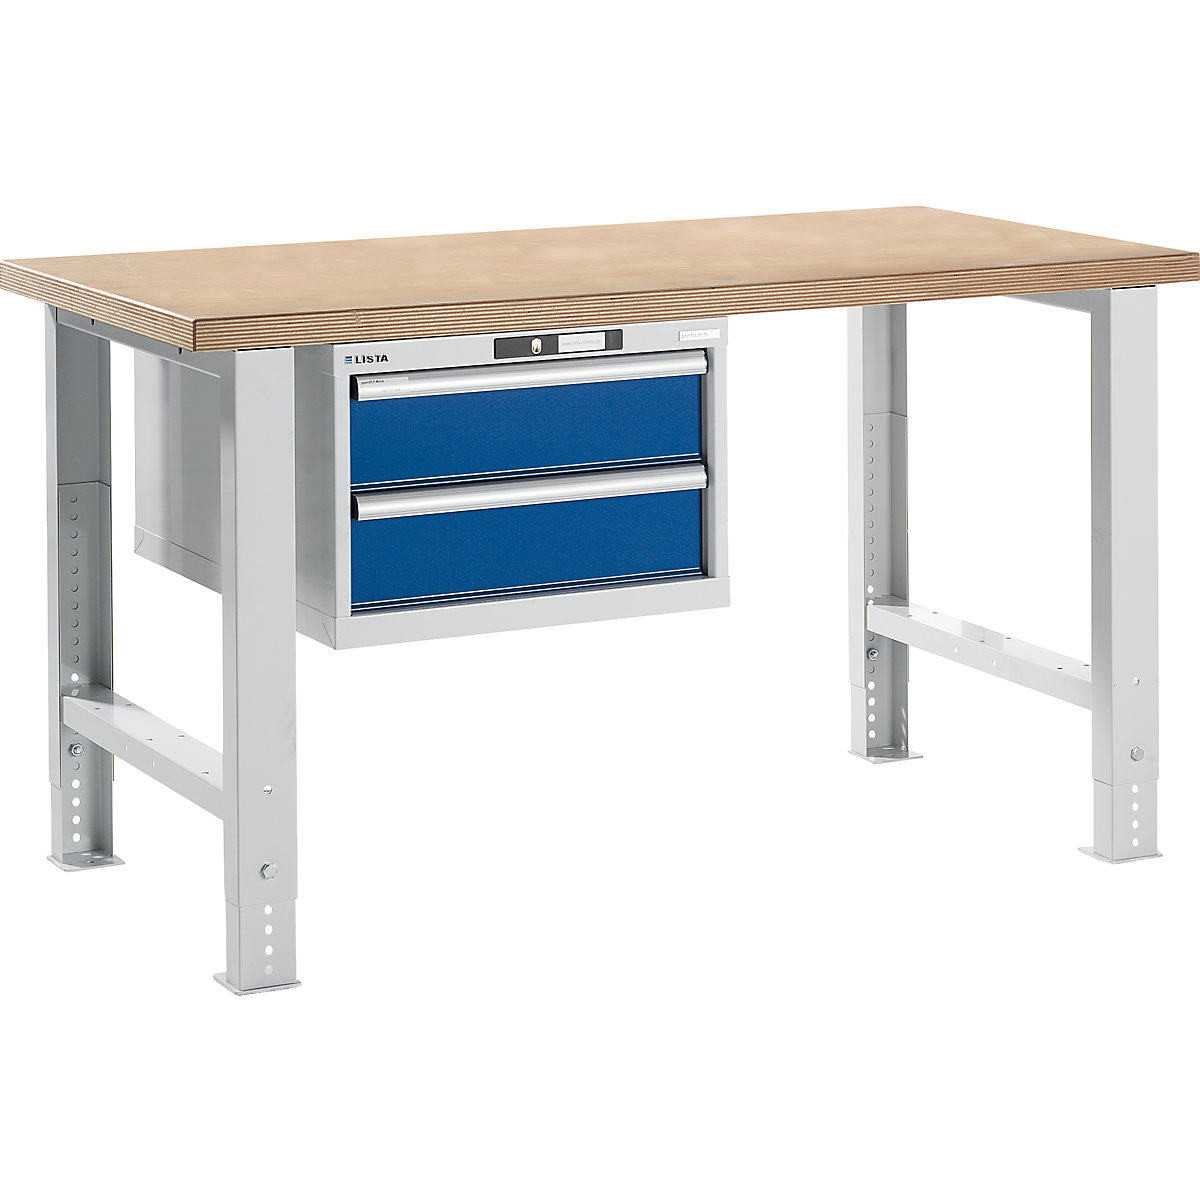 Modular workbench – LISTA, height 740 – 1090 mm, suspended drawer unit, 2 drawers, gentian blue, table width 1500 mm-15